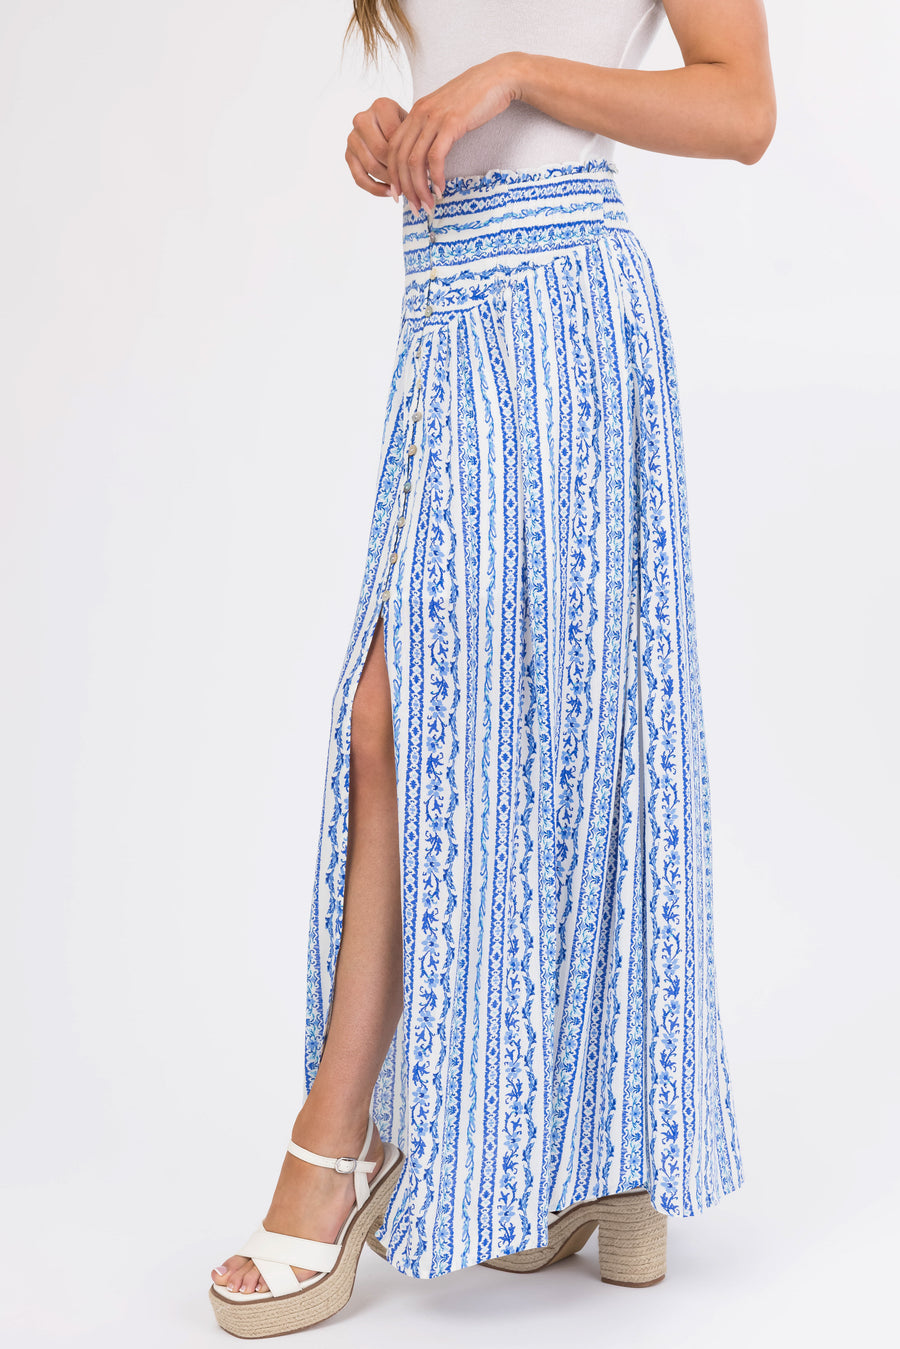 Ivory and Cobalt Front Slit Button Maxi Skirt